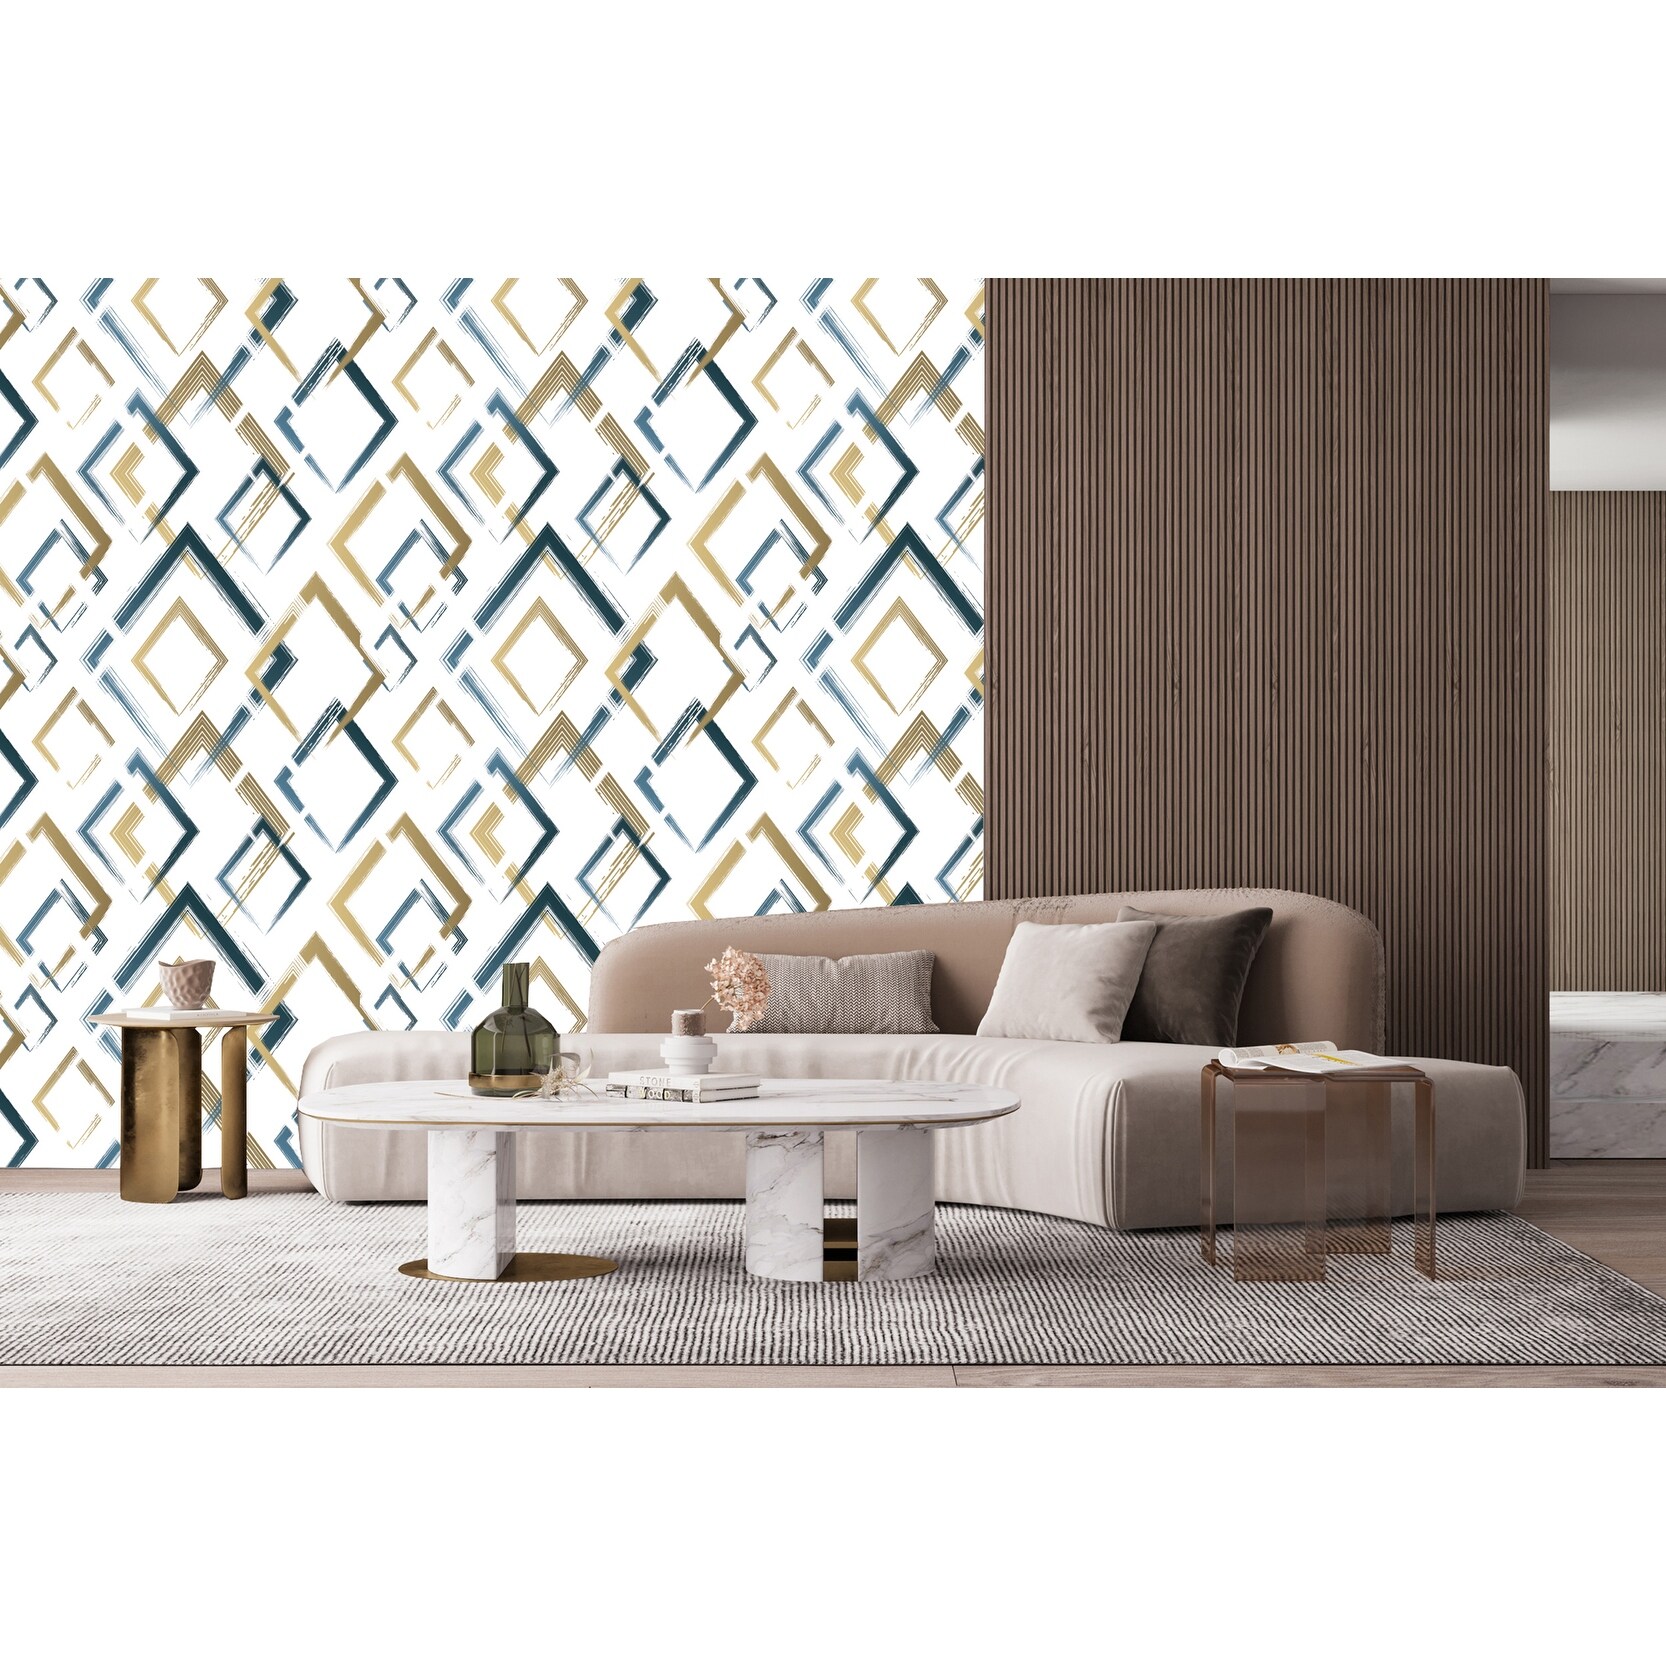 SUSSEXHOME Removable Wallpaper-Waterproof, Strippable, Light Resistance &  Cleanable Wall Paper Roll-Wallpaper-Leaves - On Sale - Bed Bath & Beyond -  31784534